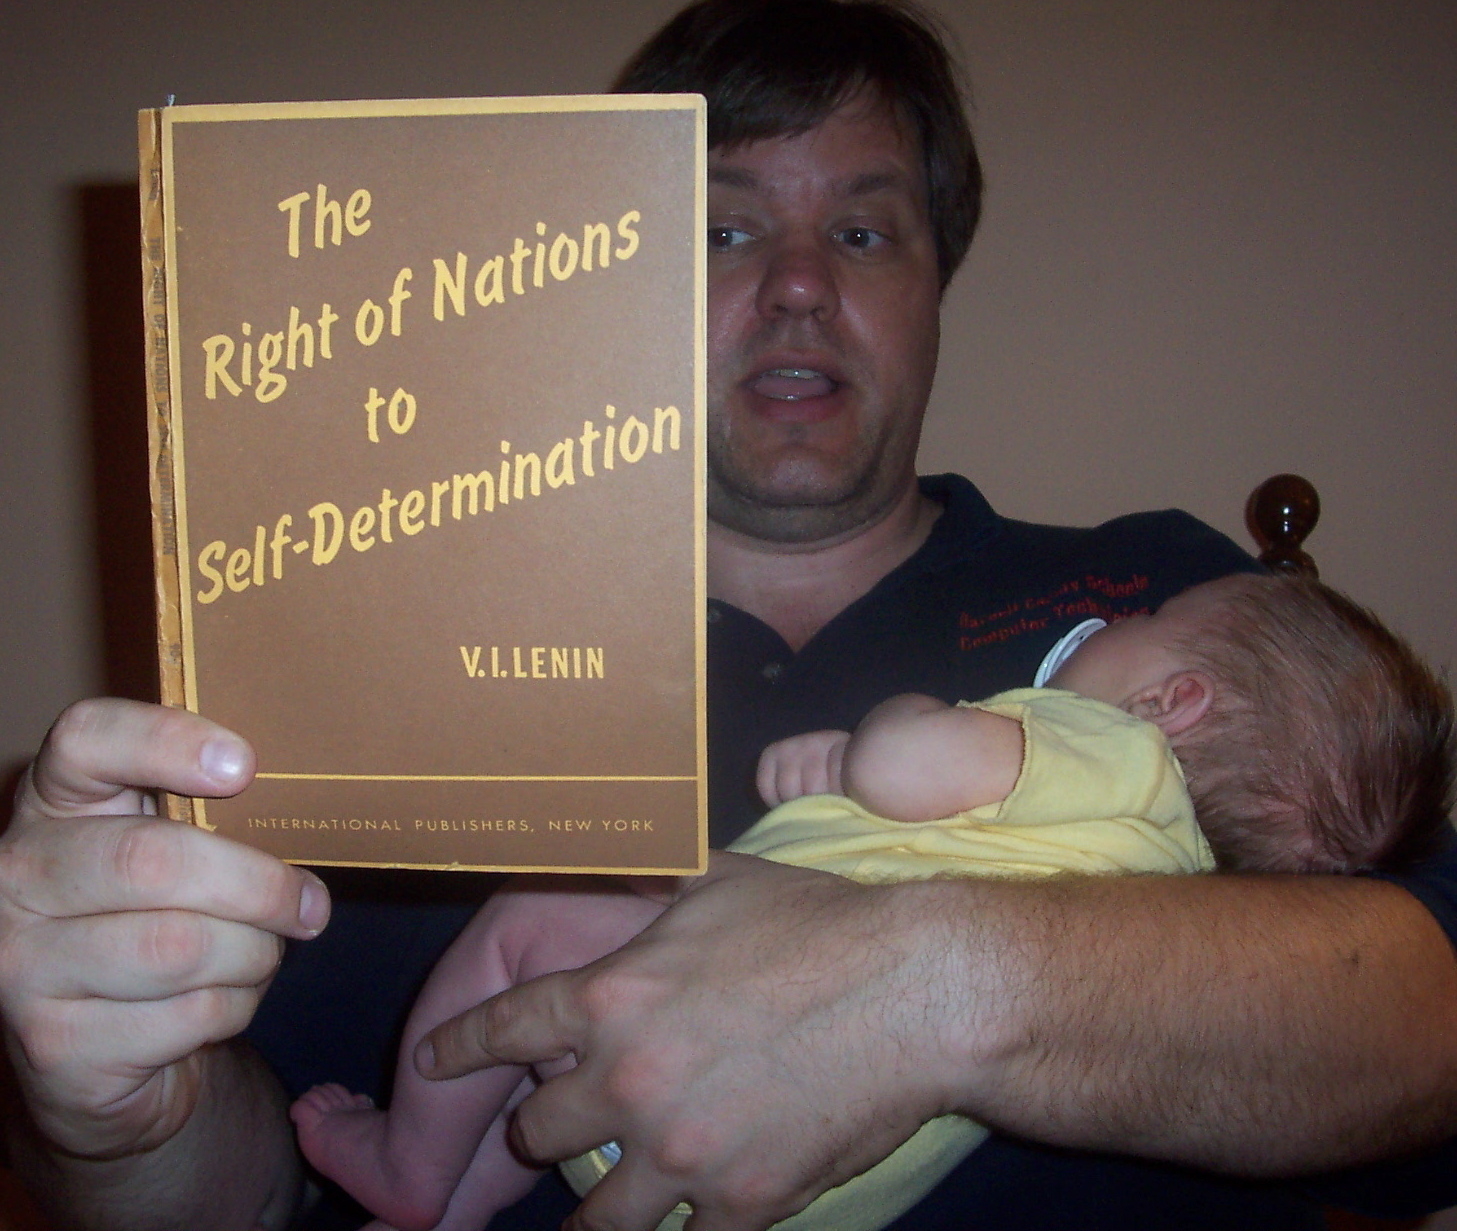 A man reading a book by Lenin to a baby